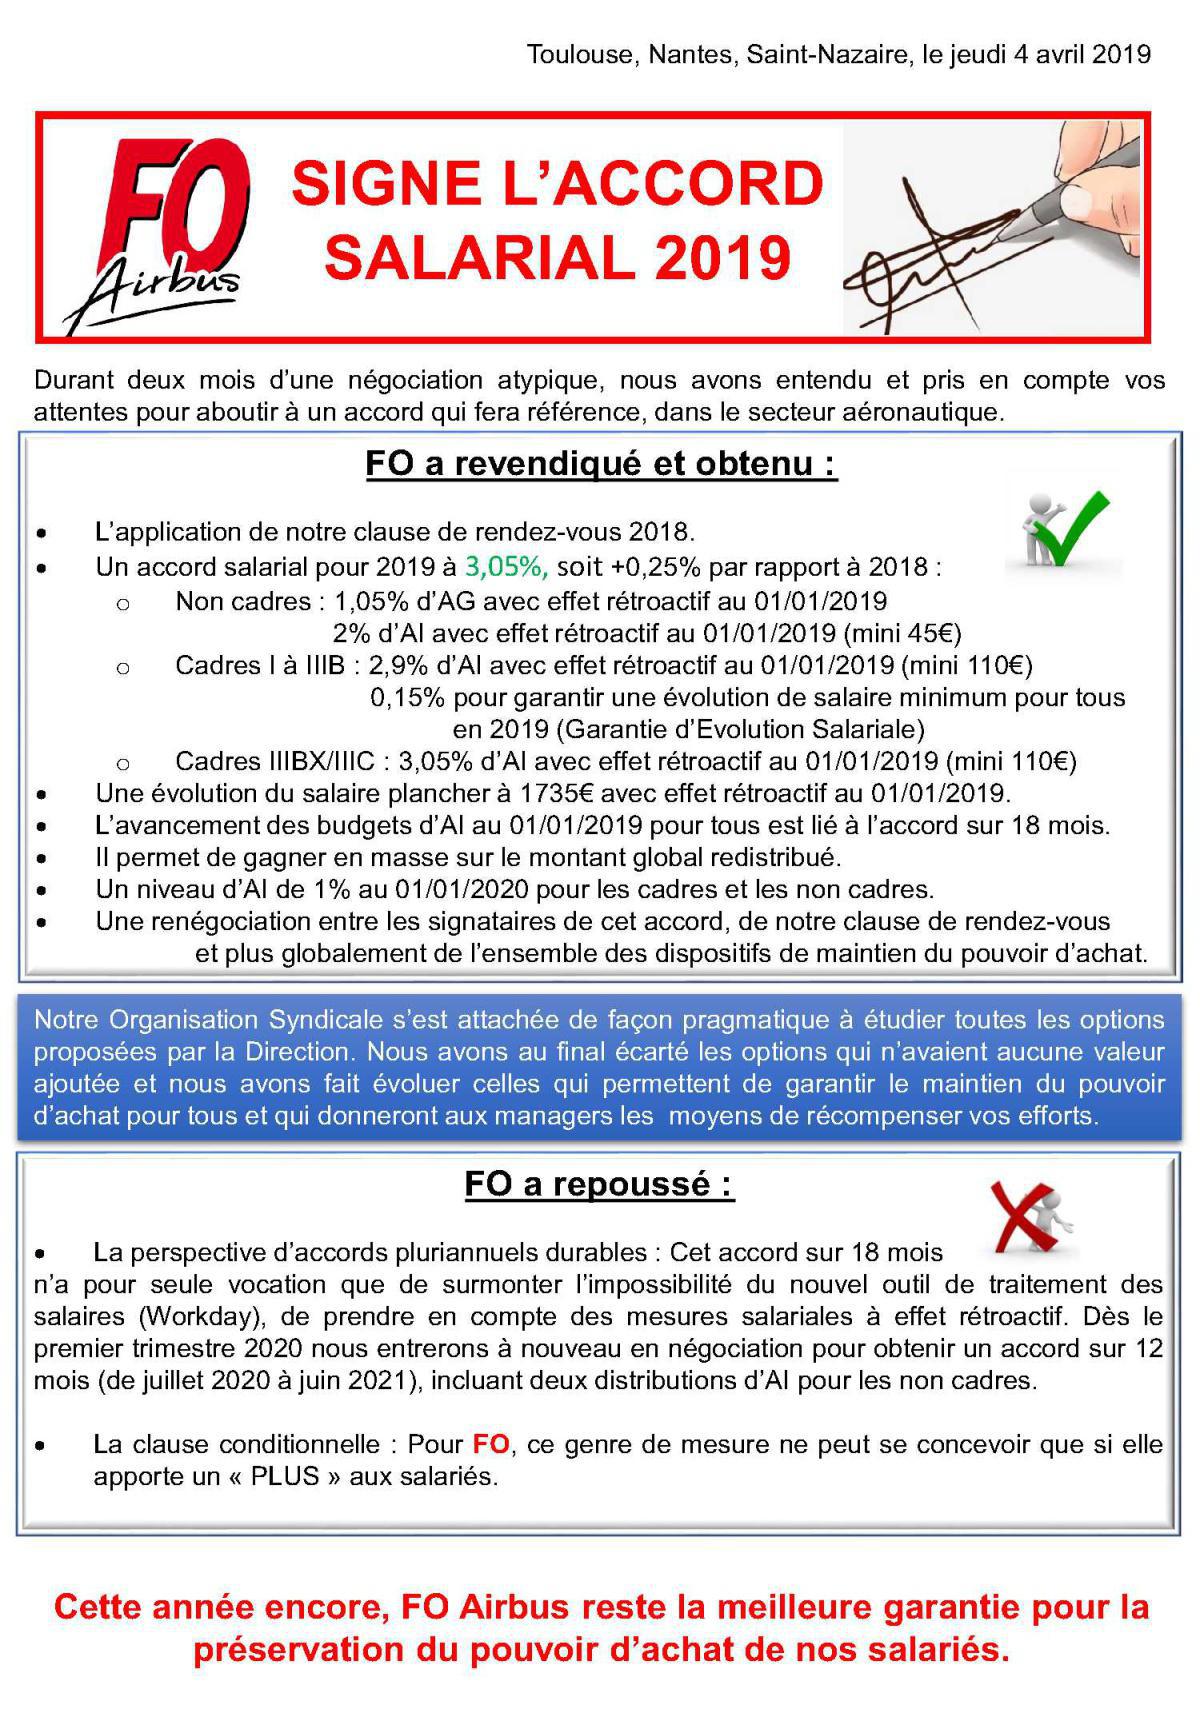 Tract : FO signe l'accord salarial 2019